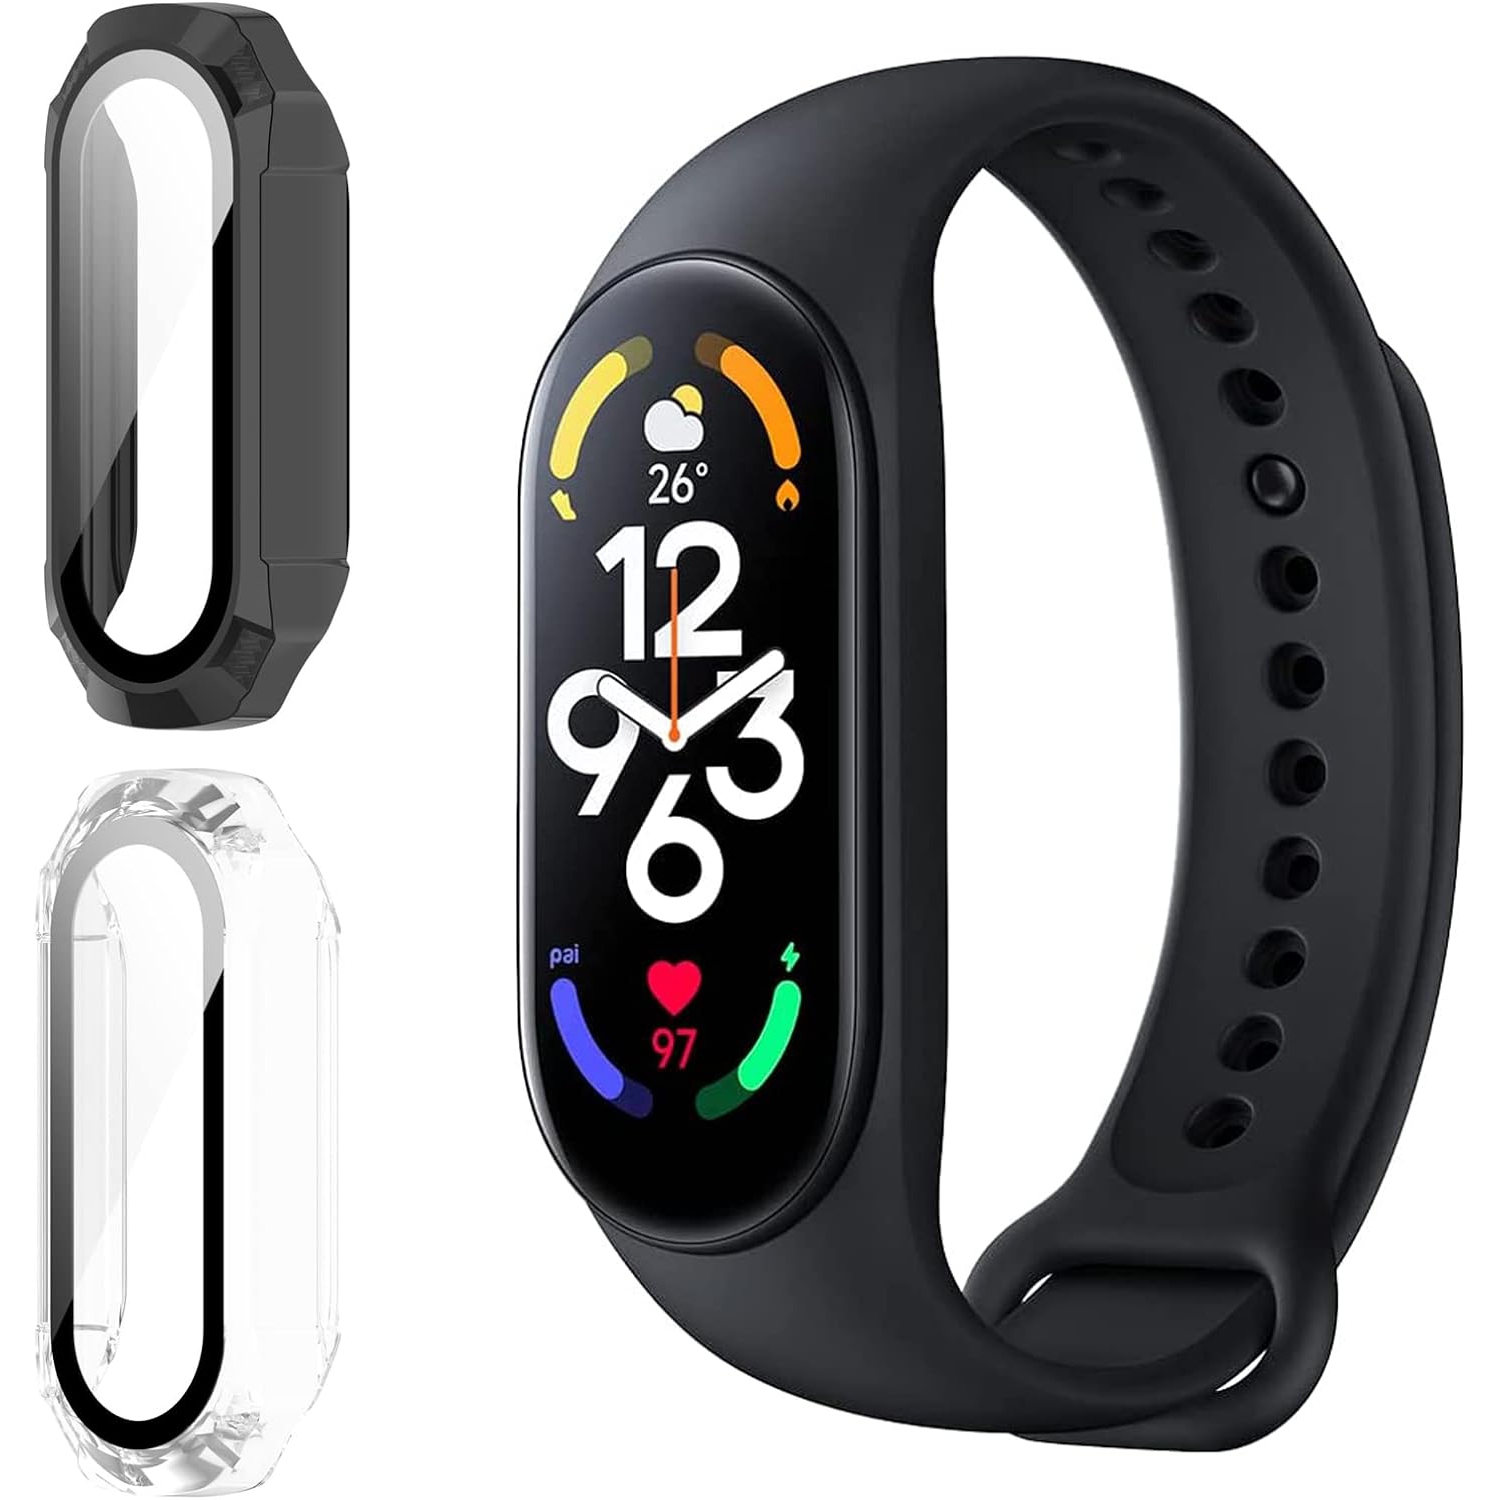 Case with Tempered Glass Screen Protector for Xiaomi Mi Band 7, 2Pack Full Coverage Ultra-Thin Anti-Scratch